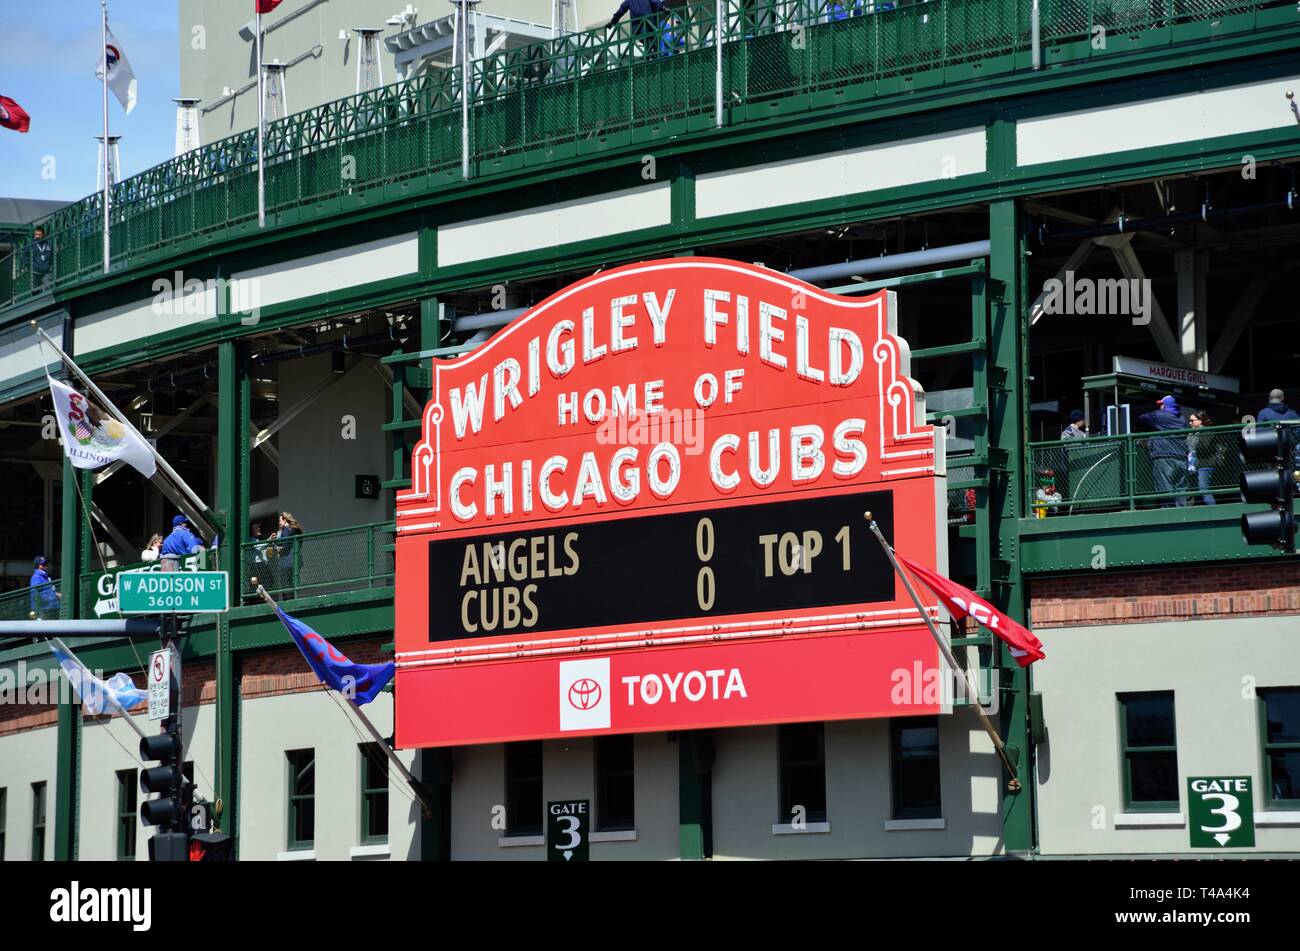 They've changed the 'NITE GAME' display on the Wrigley Field